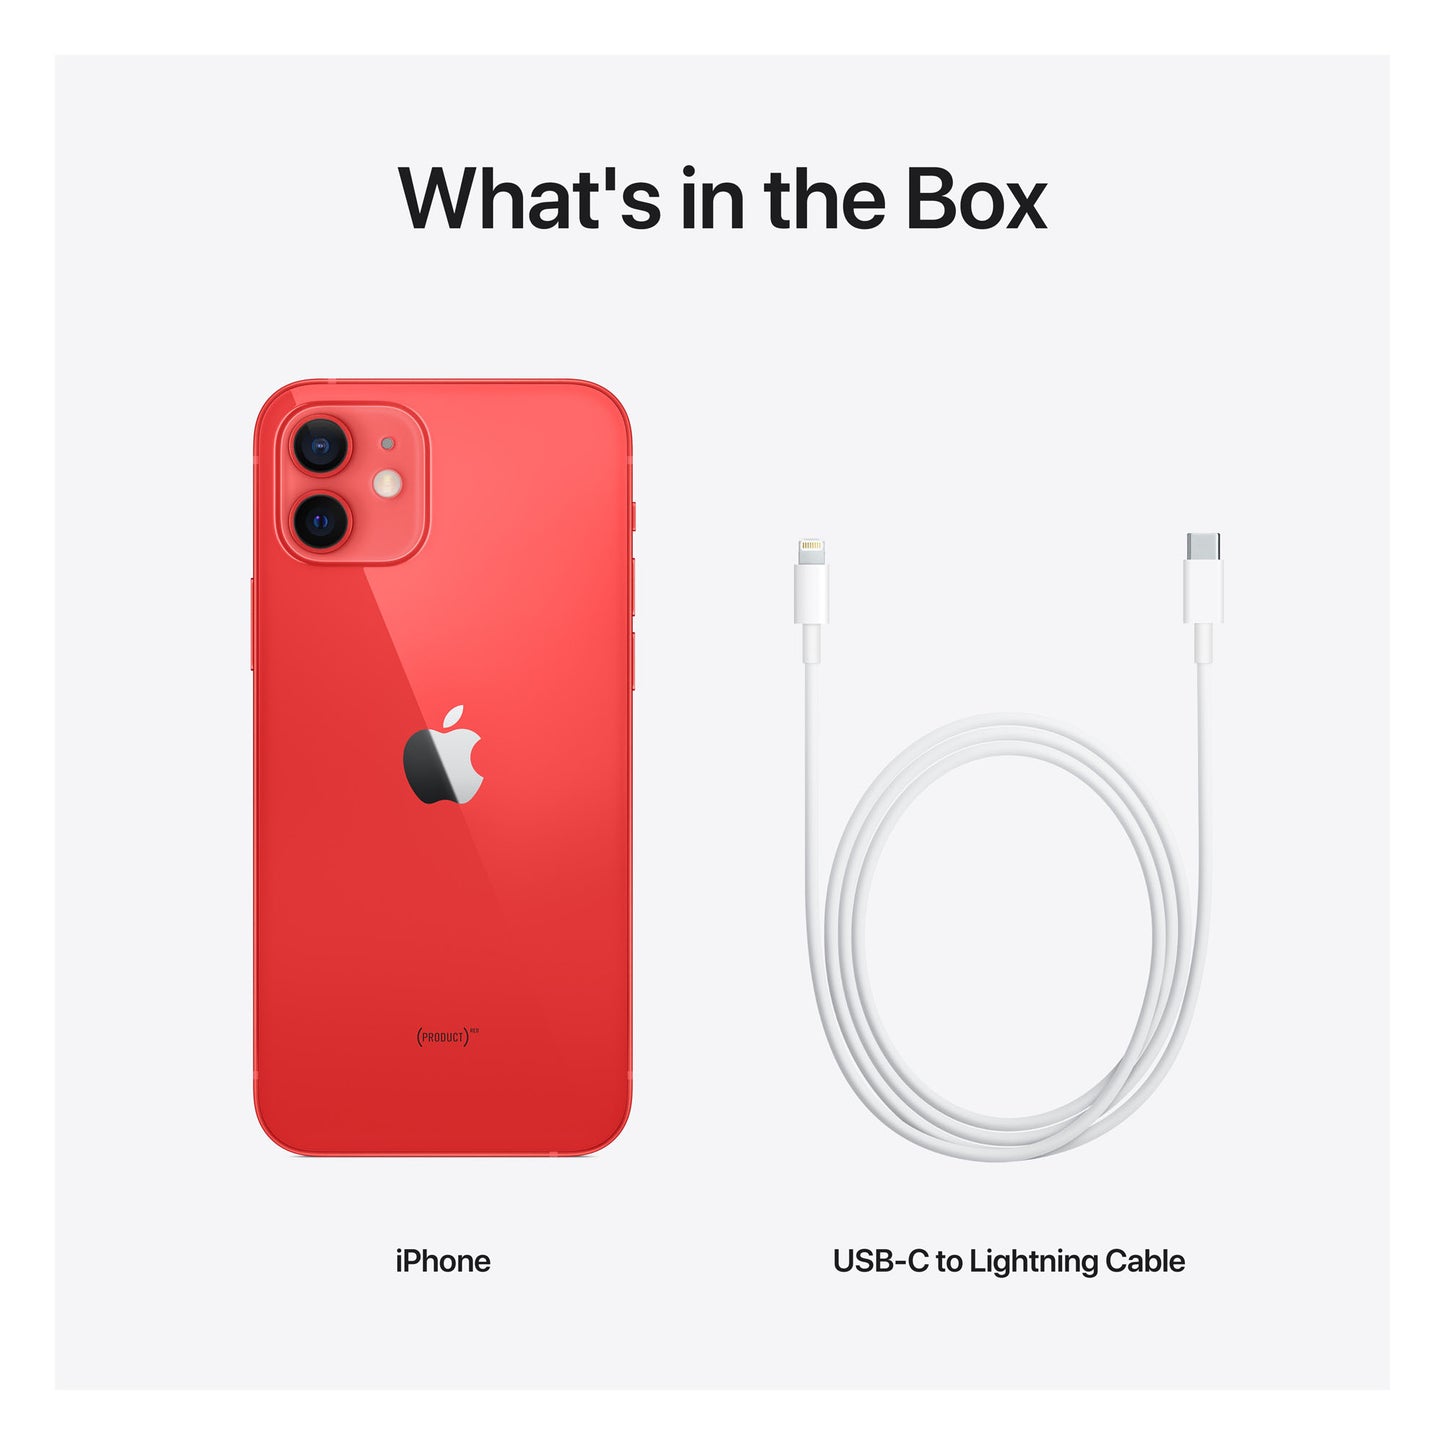 iPhone 12 128GB (PRODUCT)RED